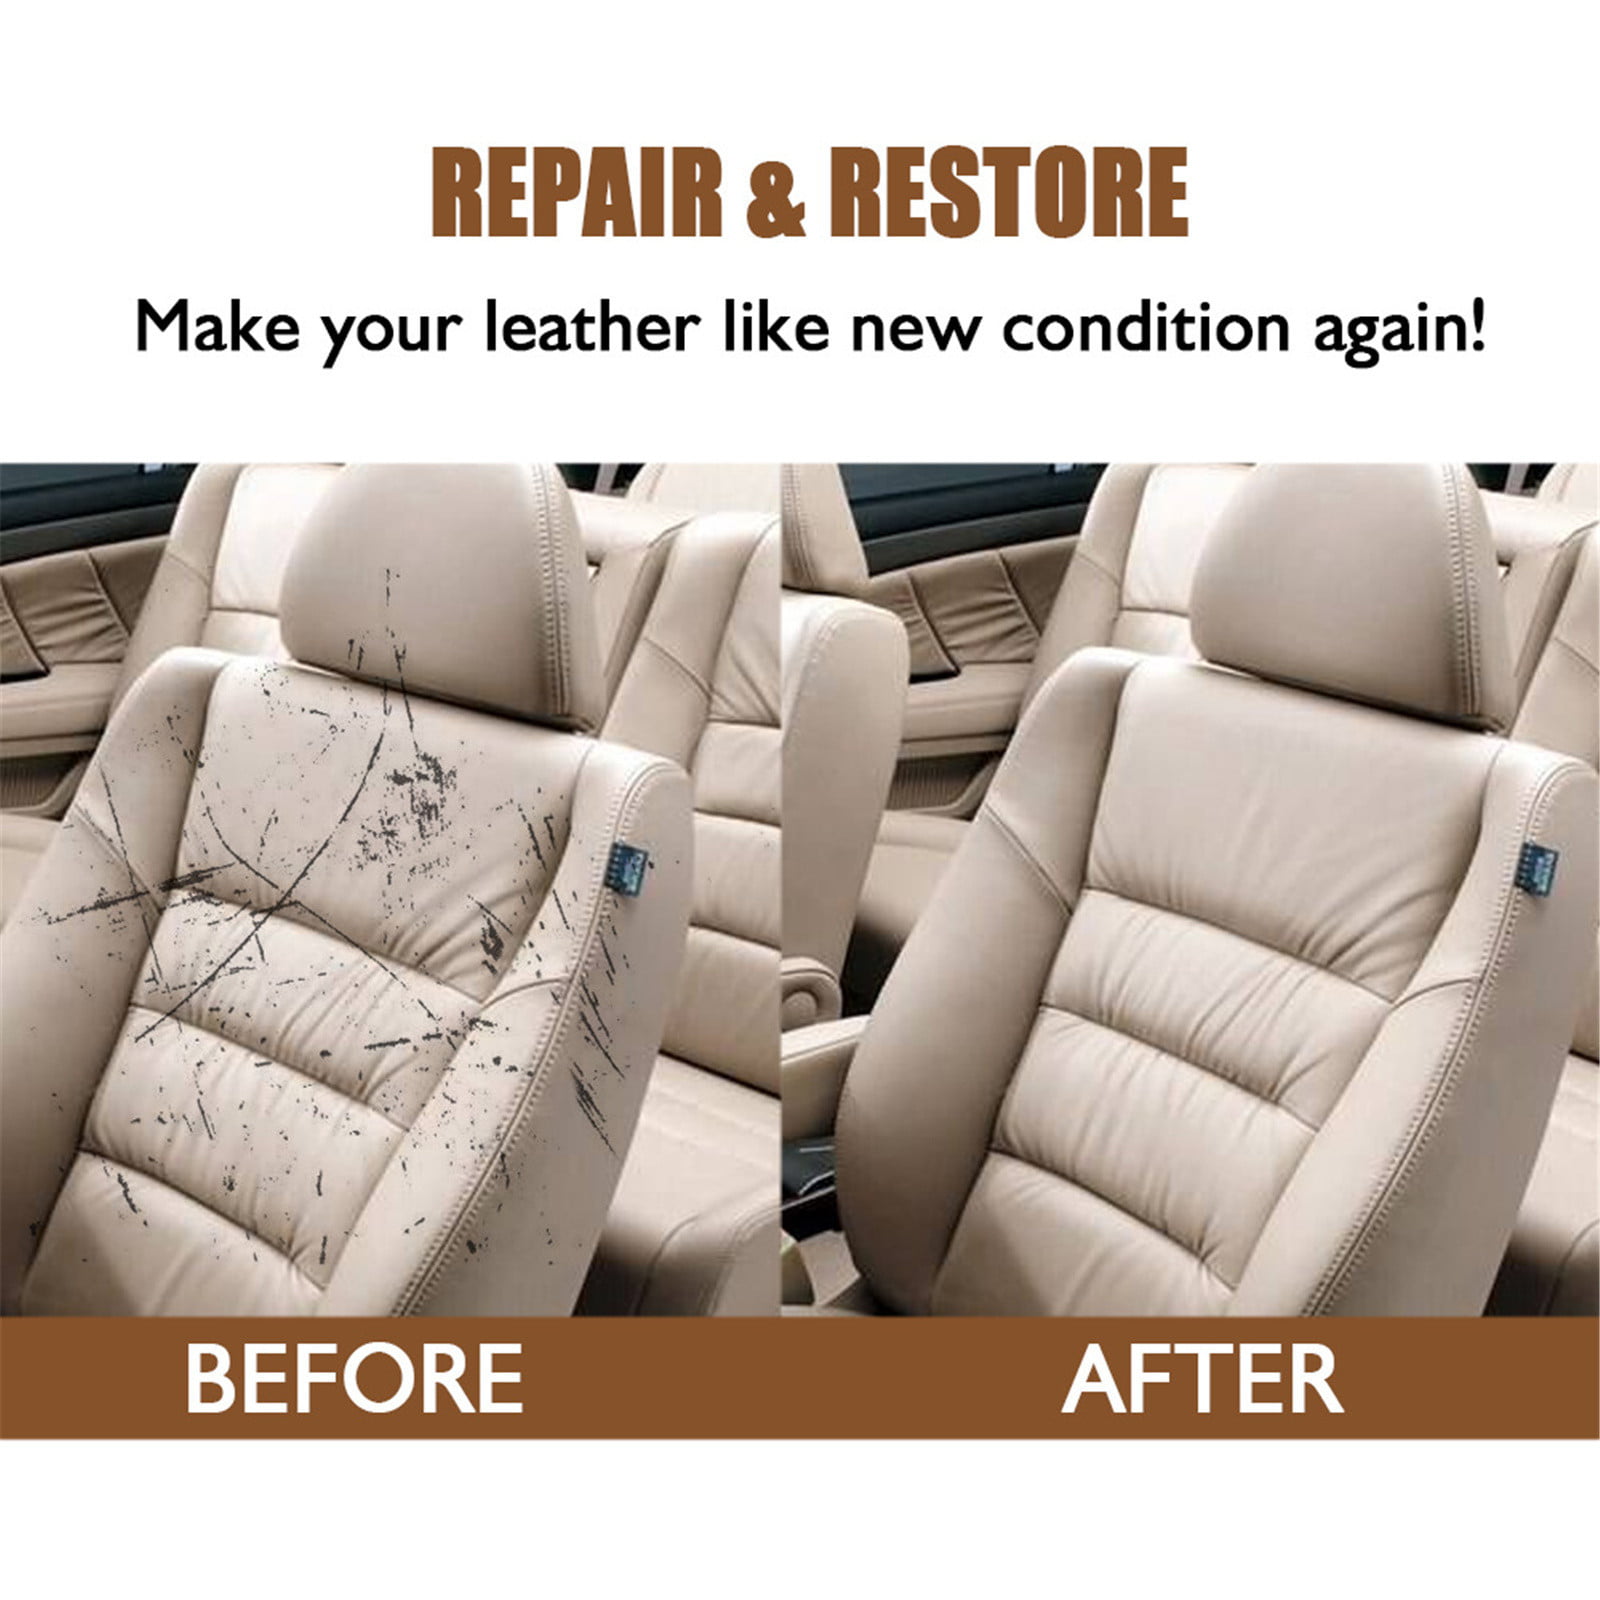 EUBUY Multifunctional Cleaning Spray Car Seat Leather Sofa No Wash Cleaner  Anti-Cracking Fading Care Maintenance Spray 